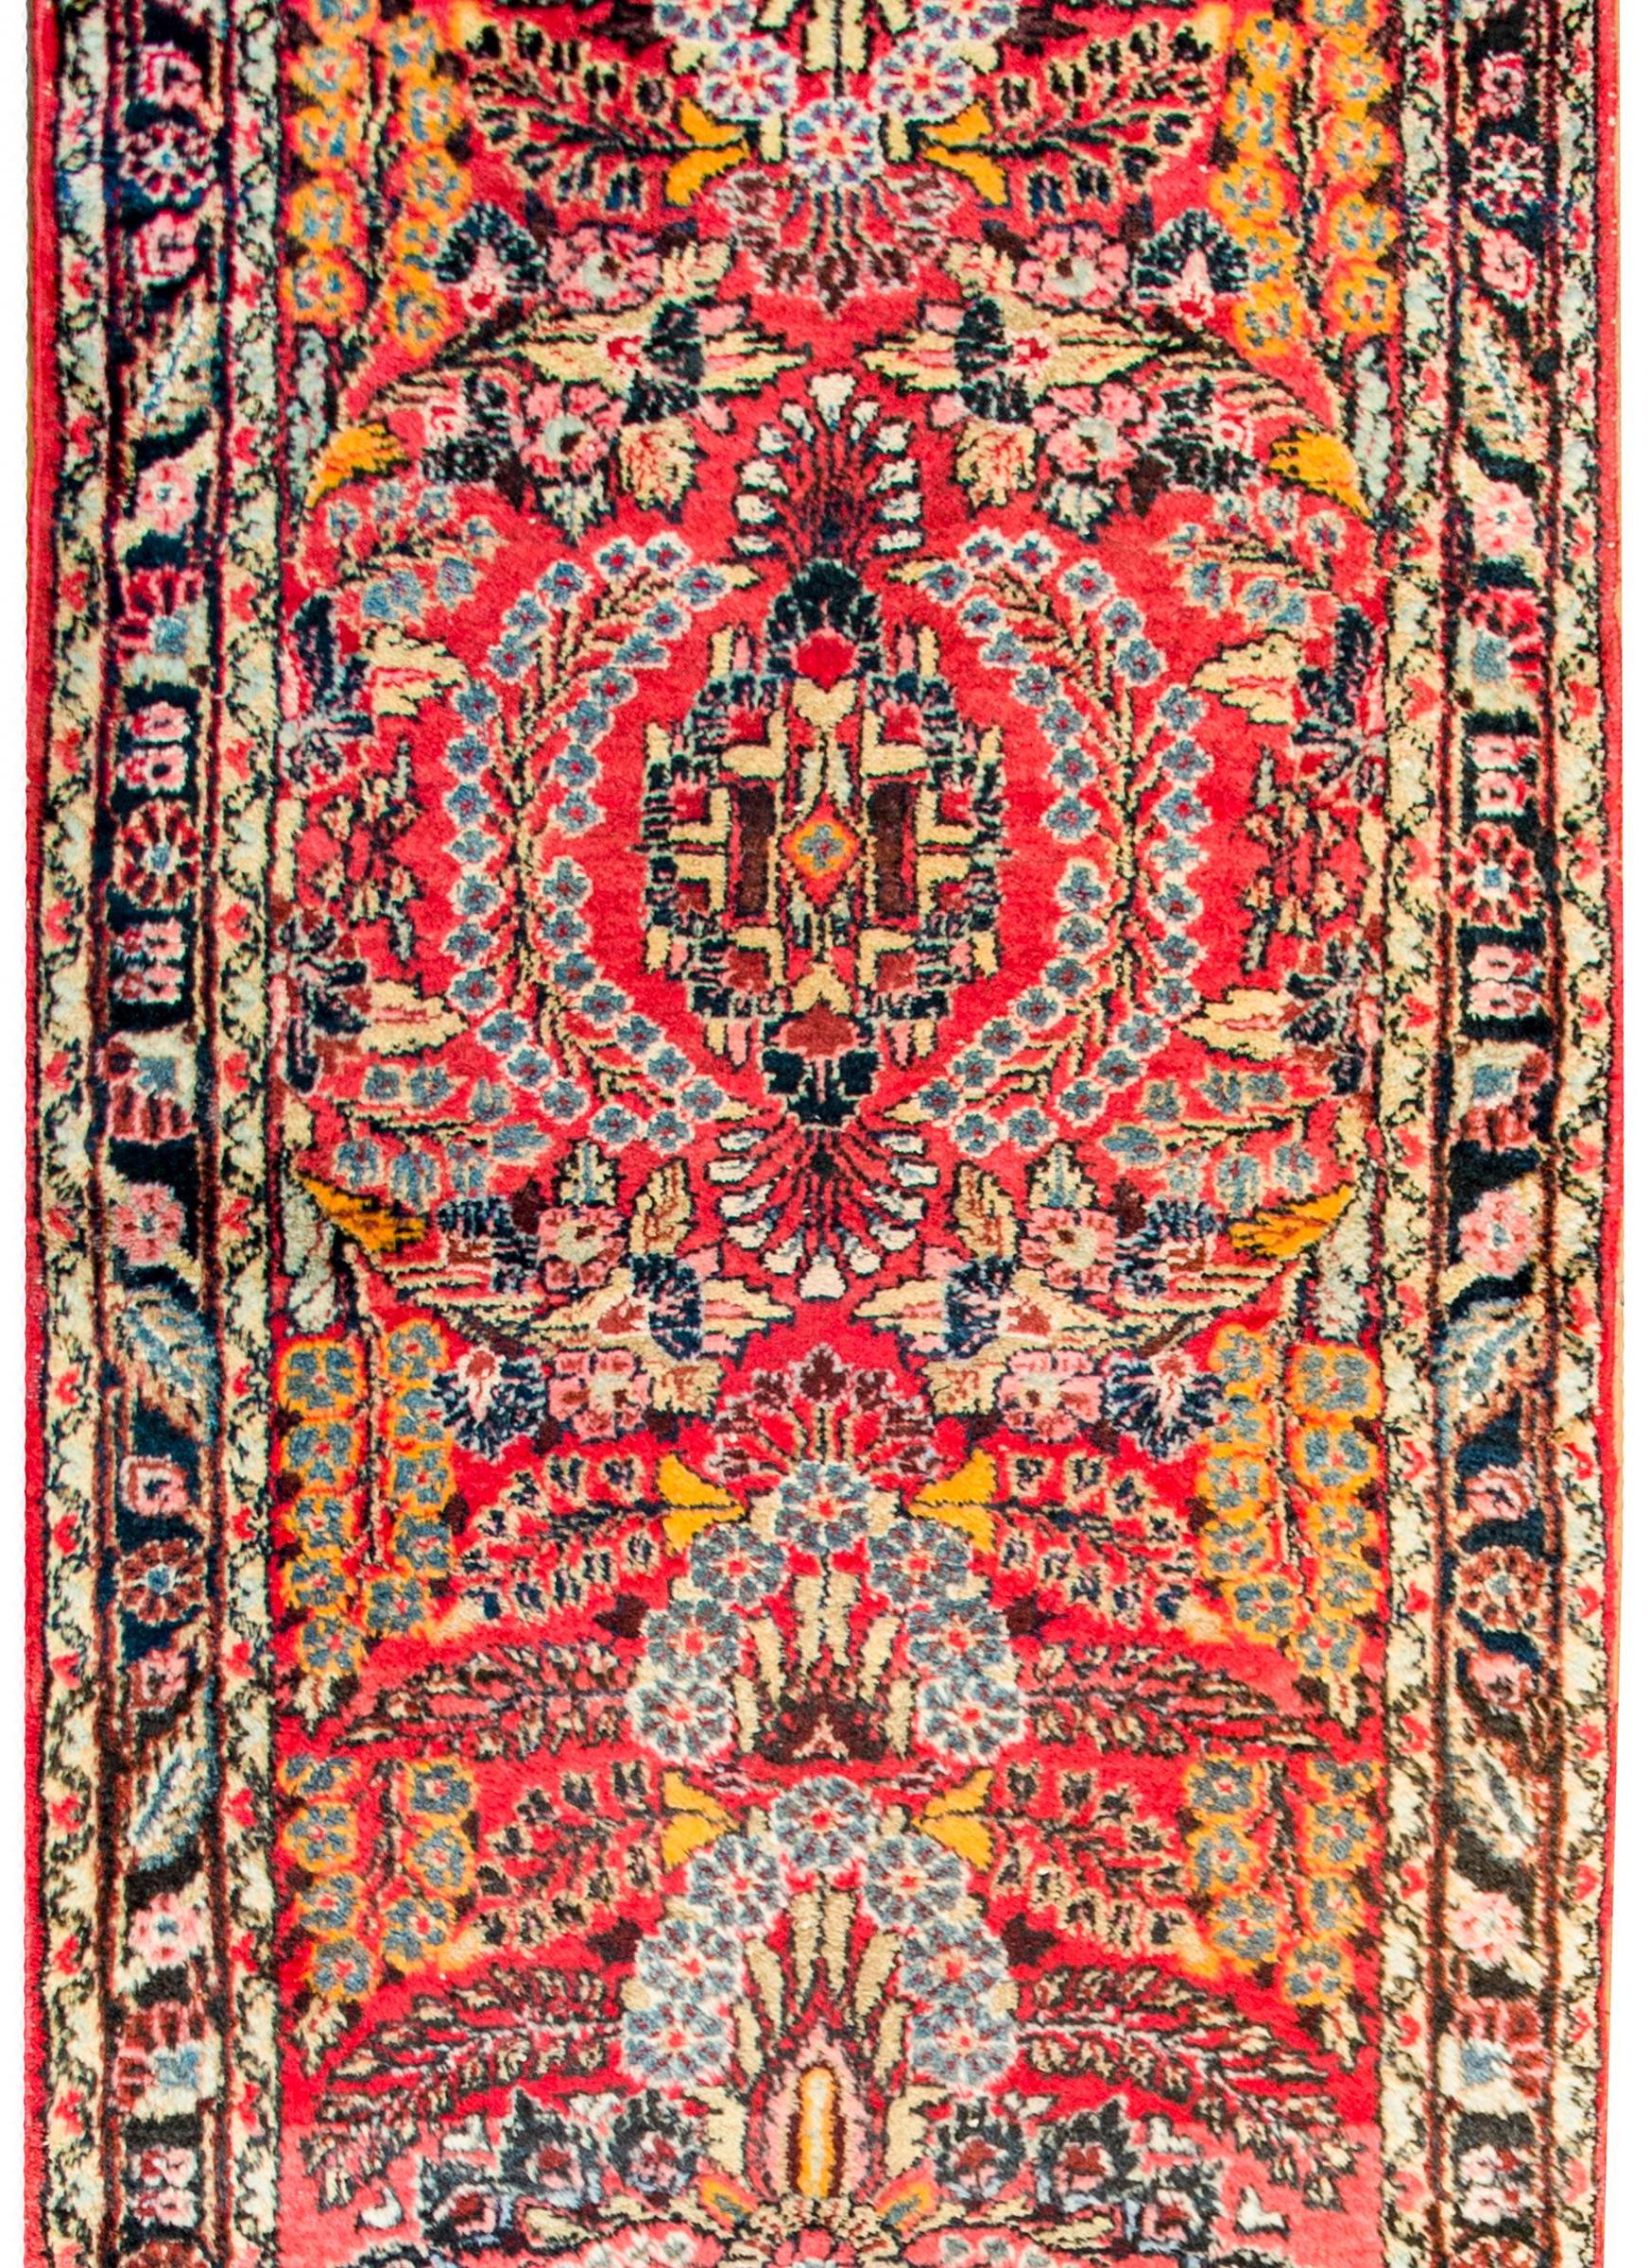 An incredible early 20th century Persian Lilihan runner with a beautiful mirrored floral and leaf patterned motif flanked by a complex border of multiple floral and leaf patterned stripes.